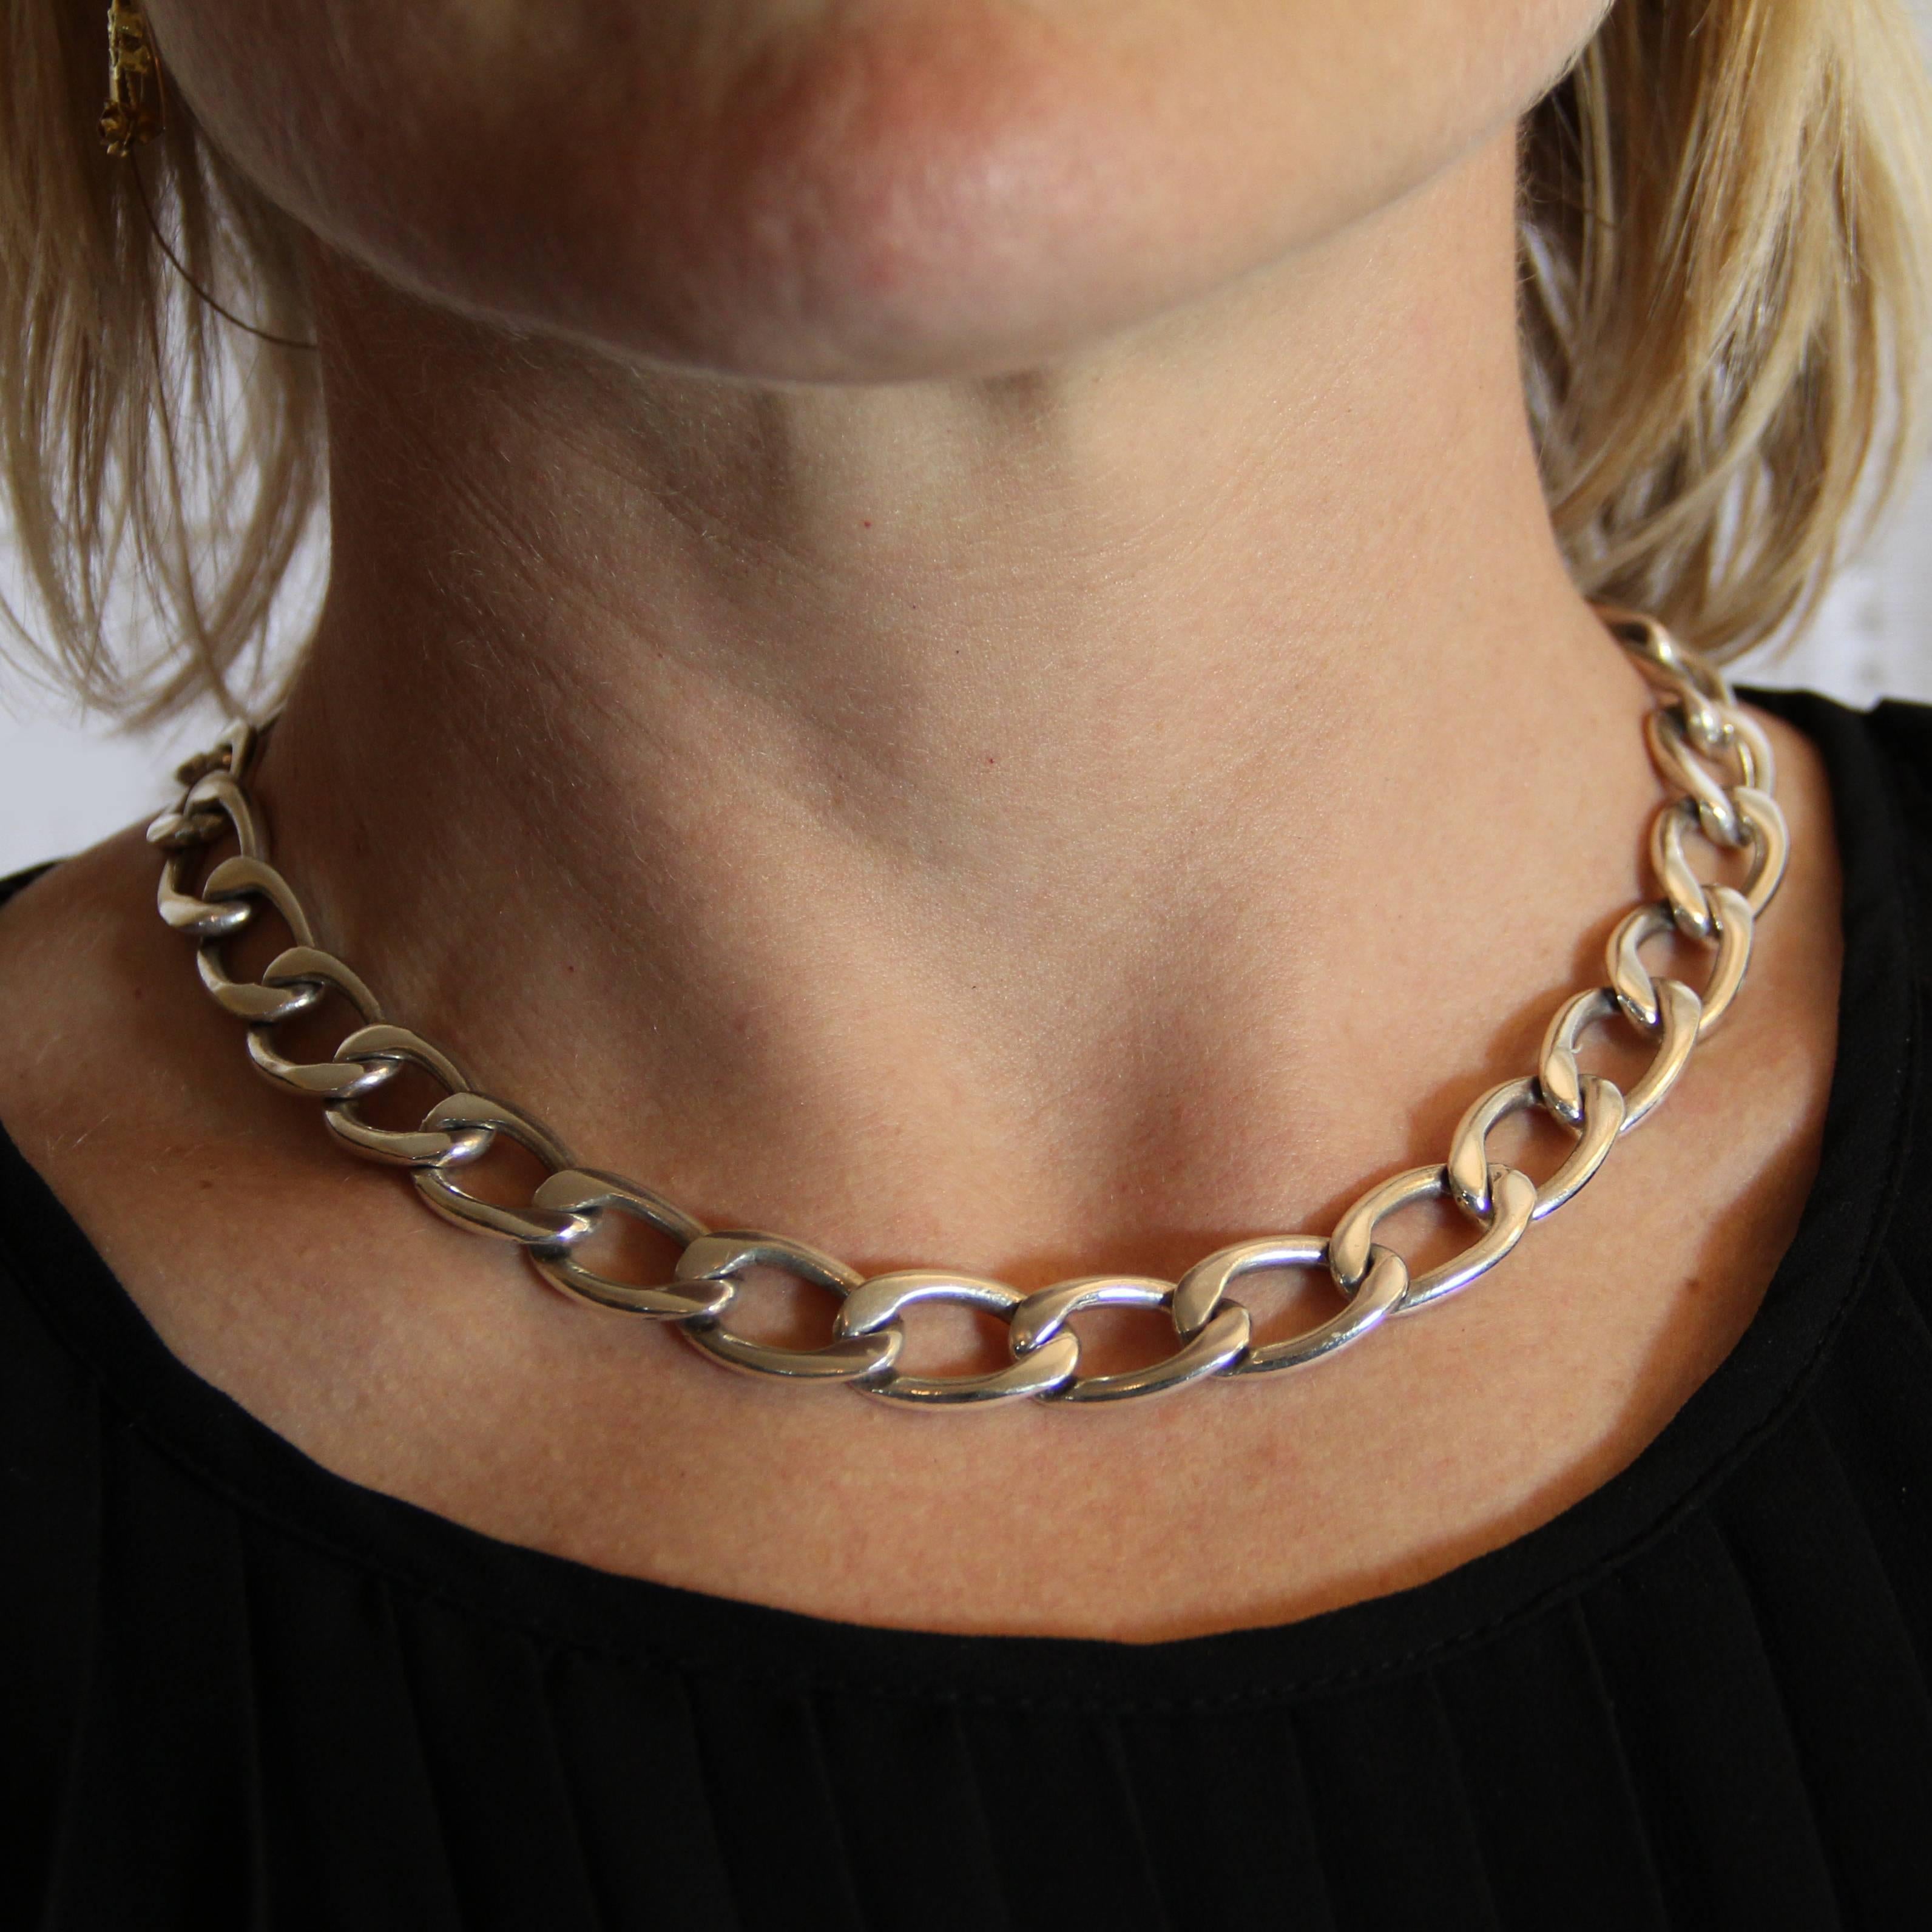 Necklace in Silver, 925.
It consists of a large flattened gourmette mesh. The 2 end links have a notch and interlock to close the necklace.
Length: 44.5 cm, width of the mesh: 1.3 cm, thickness: 0.4 cm.
Total weight of the jewel: 79.8 g